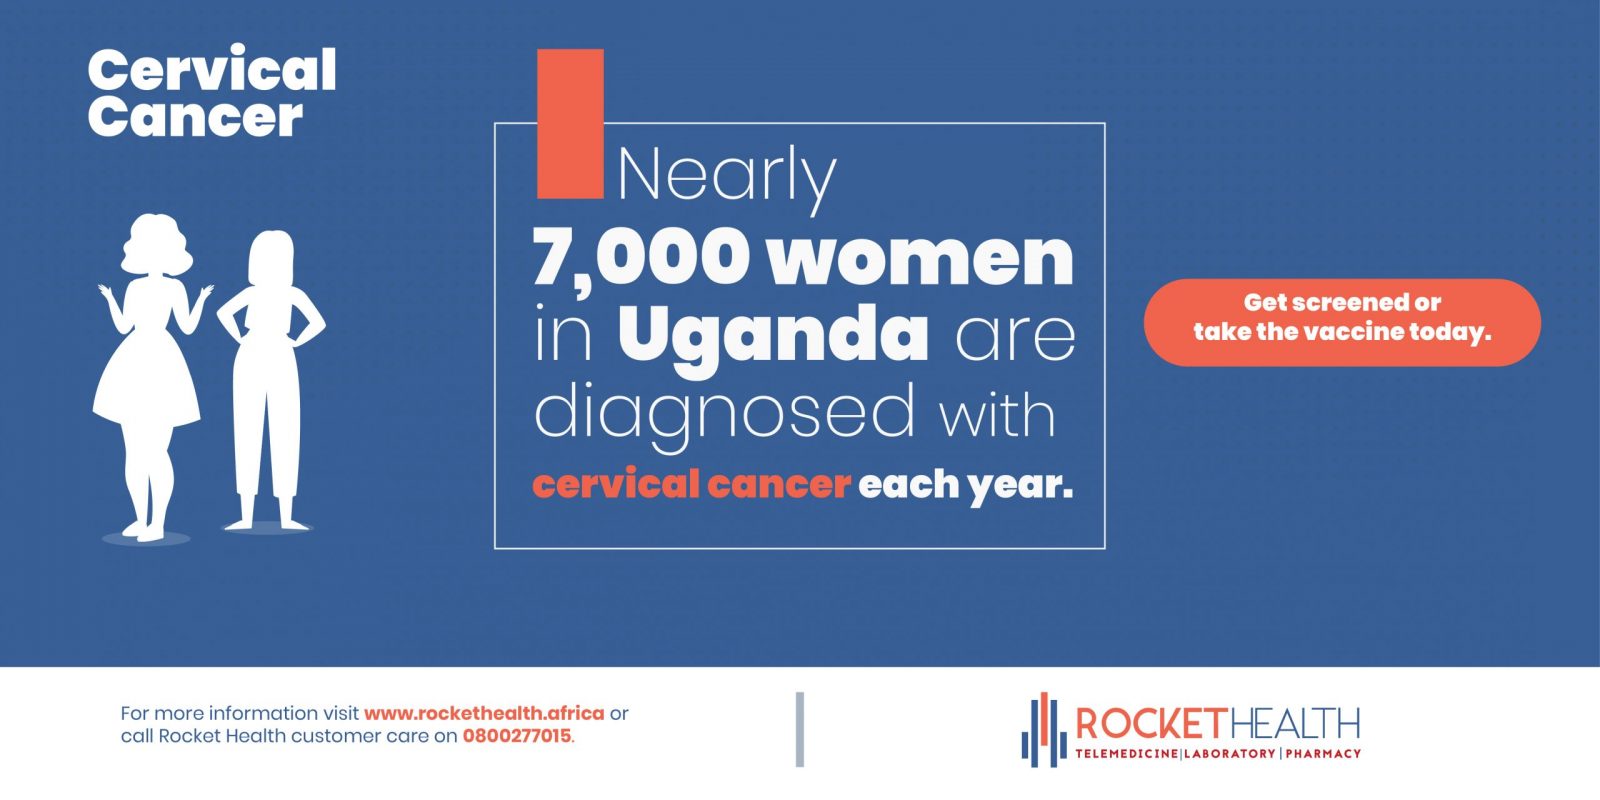 Each year, nearly 7,000 women in Uganda are diagnosed with cervical cancer and more than 4,000 die from it. Knowing the risk factors can help prevent your chances of being diagnosed.